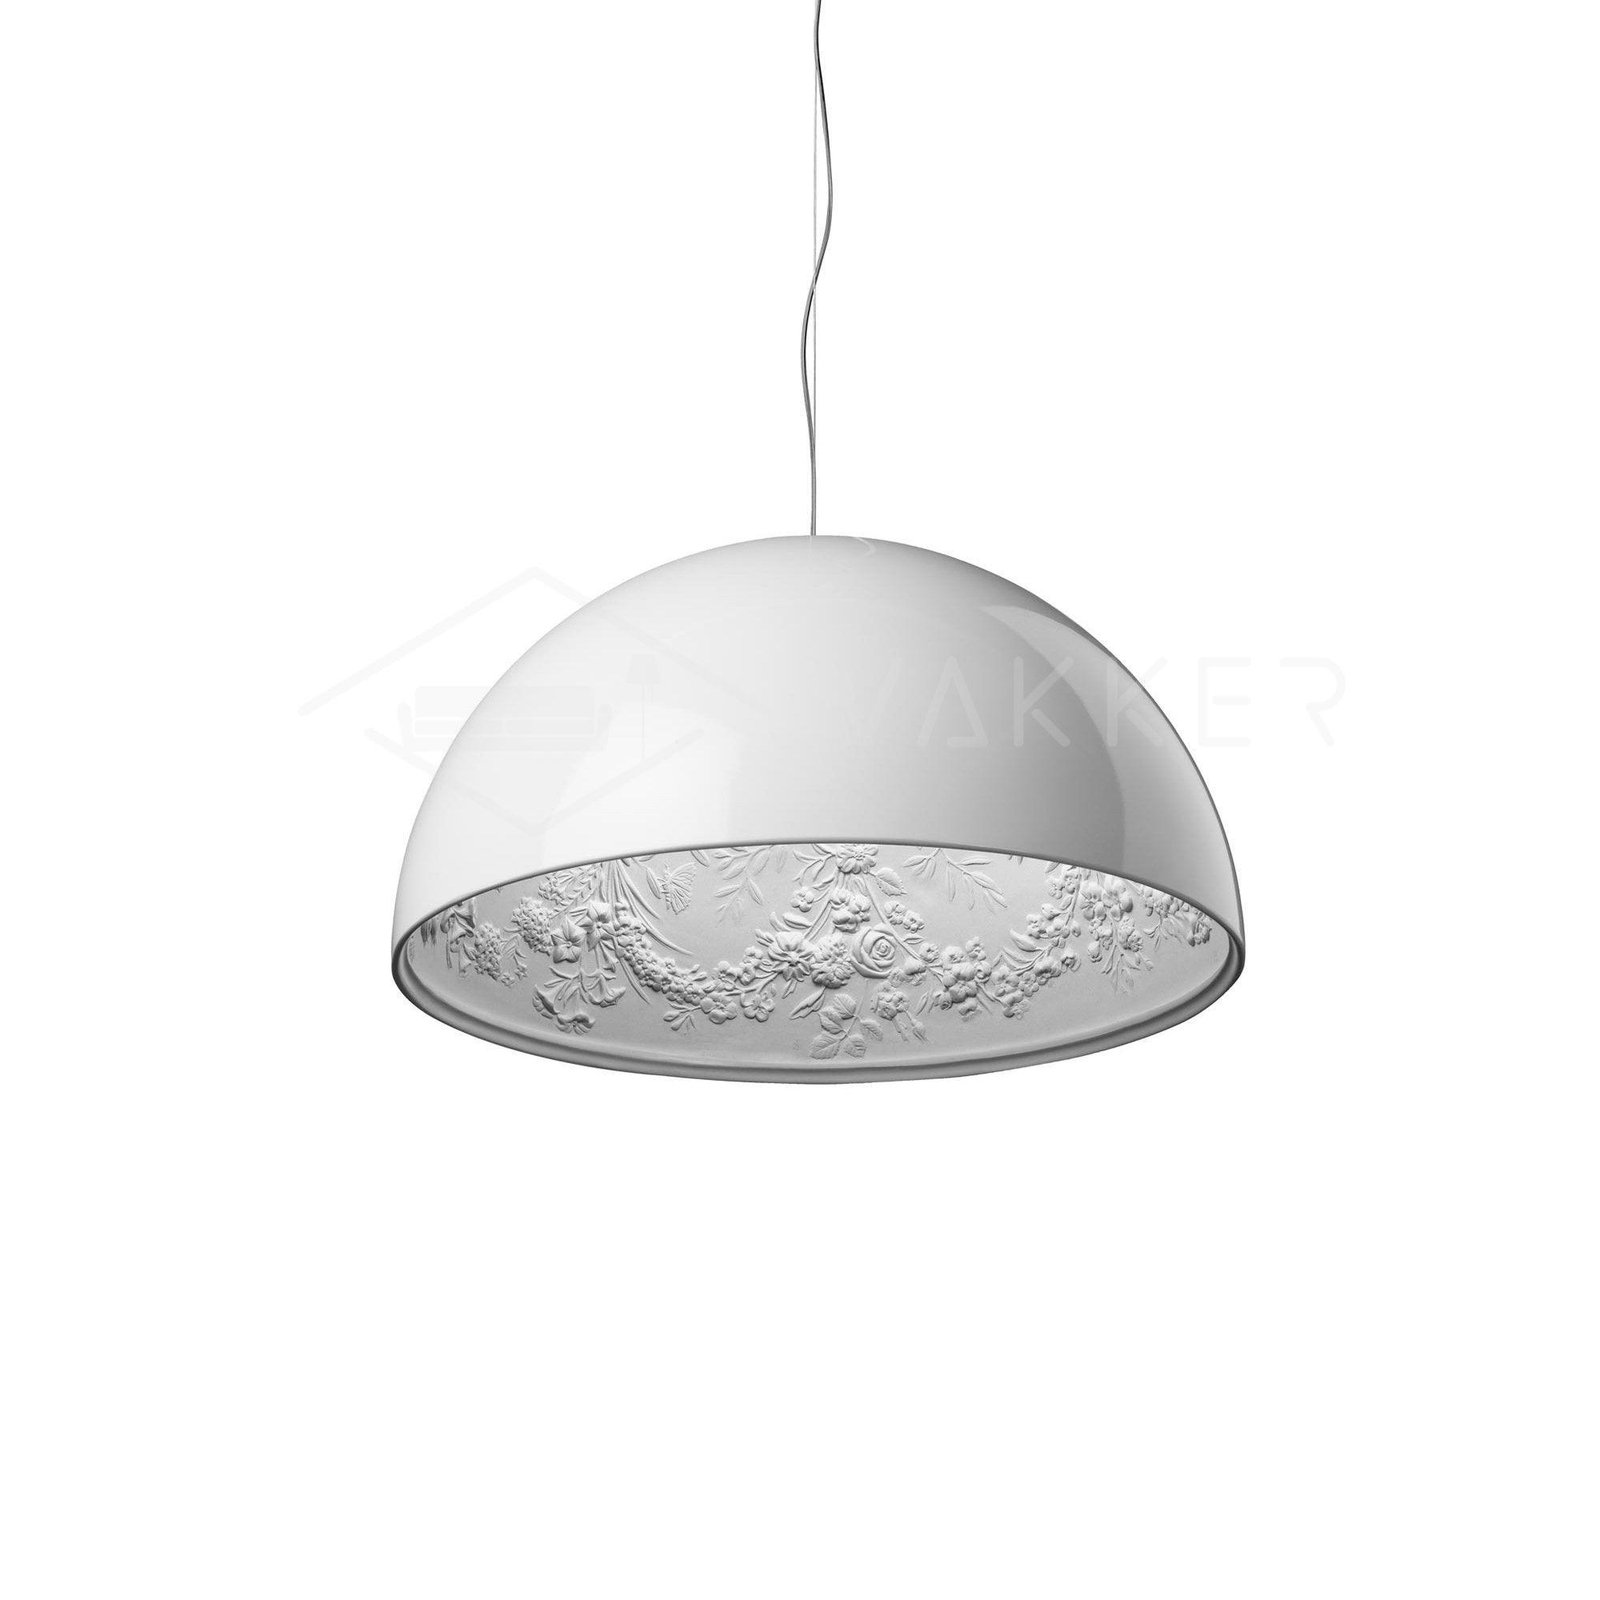 Reimagining the Sky Garden Pendant Light in Glossy White, with a Diameter of 35.4" (90cm) and a Height of 17.7" (45cm)